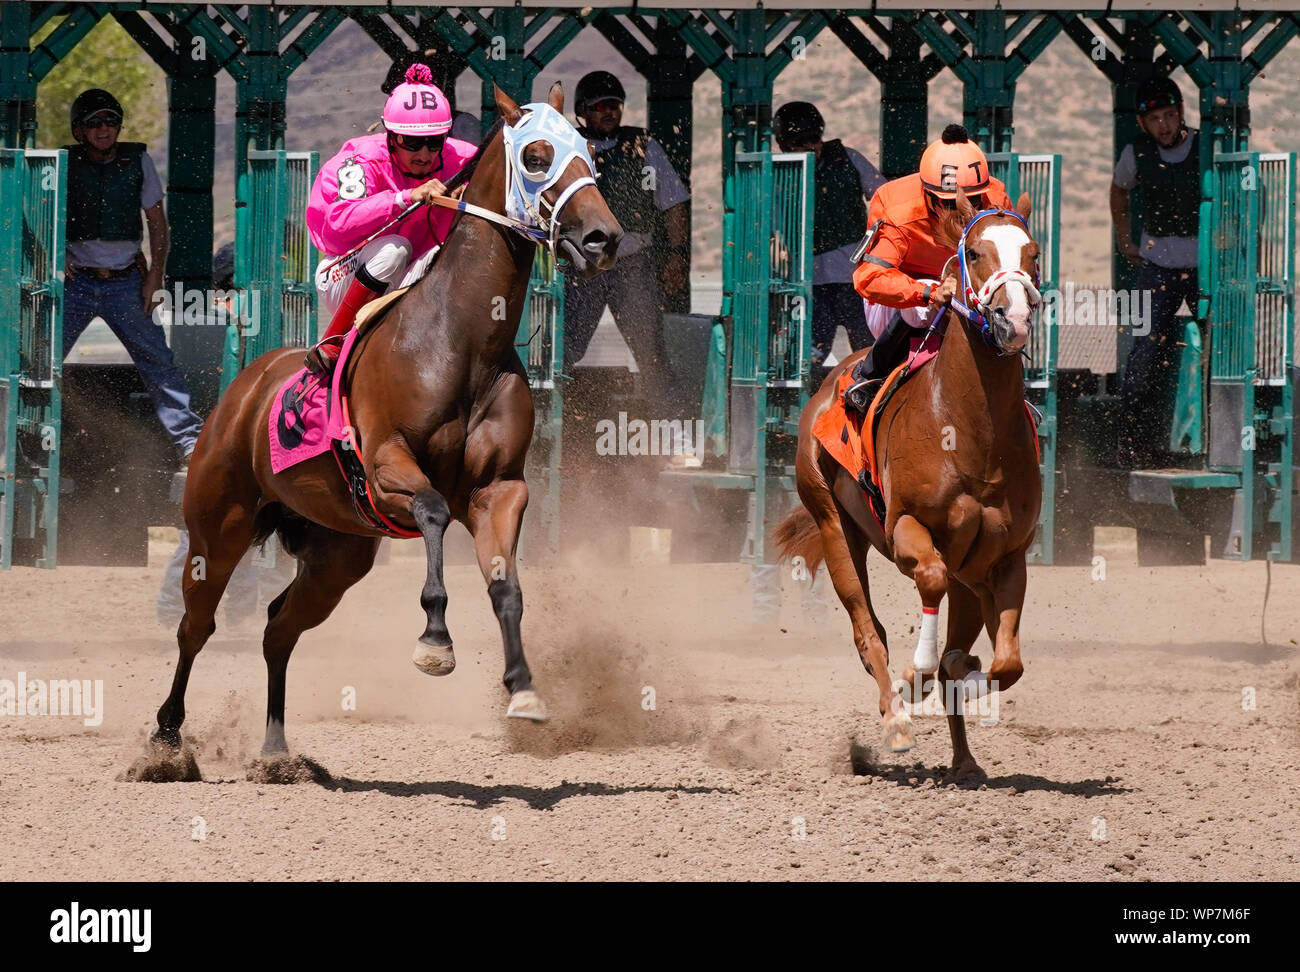 Two race horses finding their stride at the beginning of a race at Arizona Downs in Prescott Valley, Arizona on September 1, 2019 - Version 1 Stock Photo